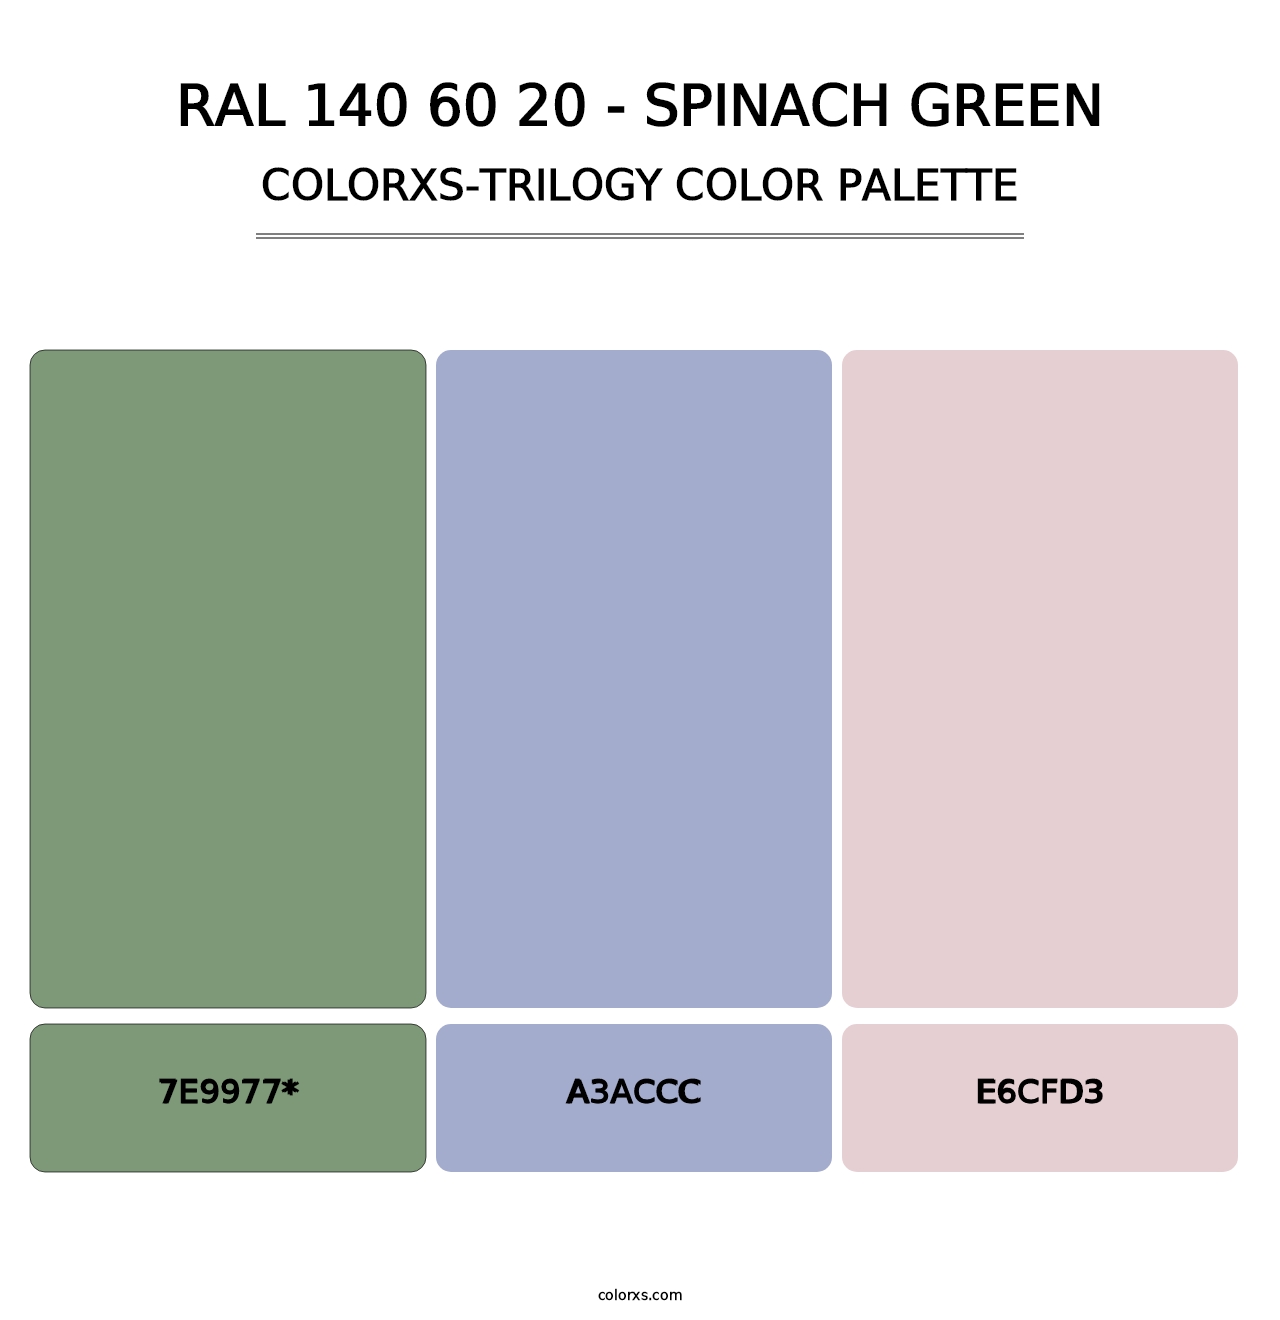 RAL 140 60 20 - Spinach Green - Colorxs Trilogy Palette